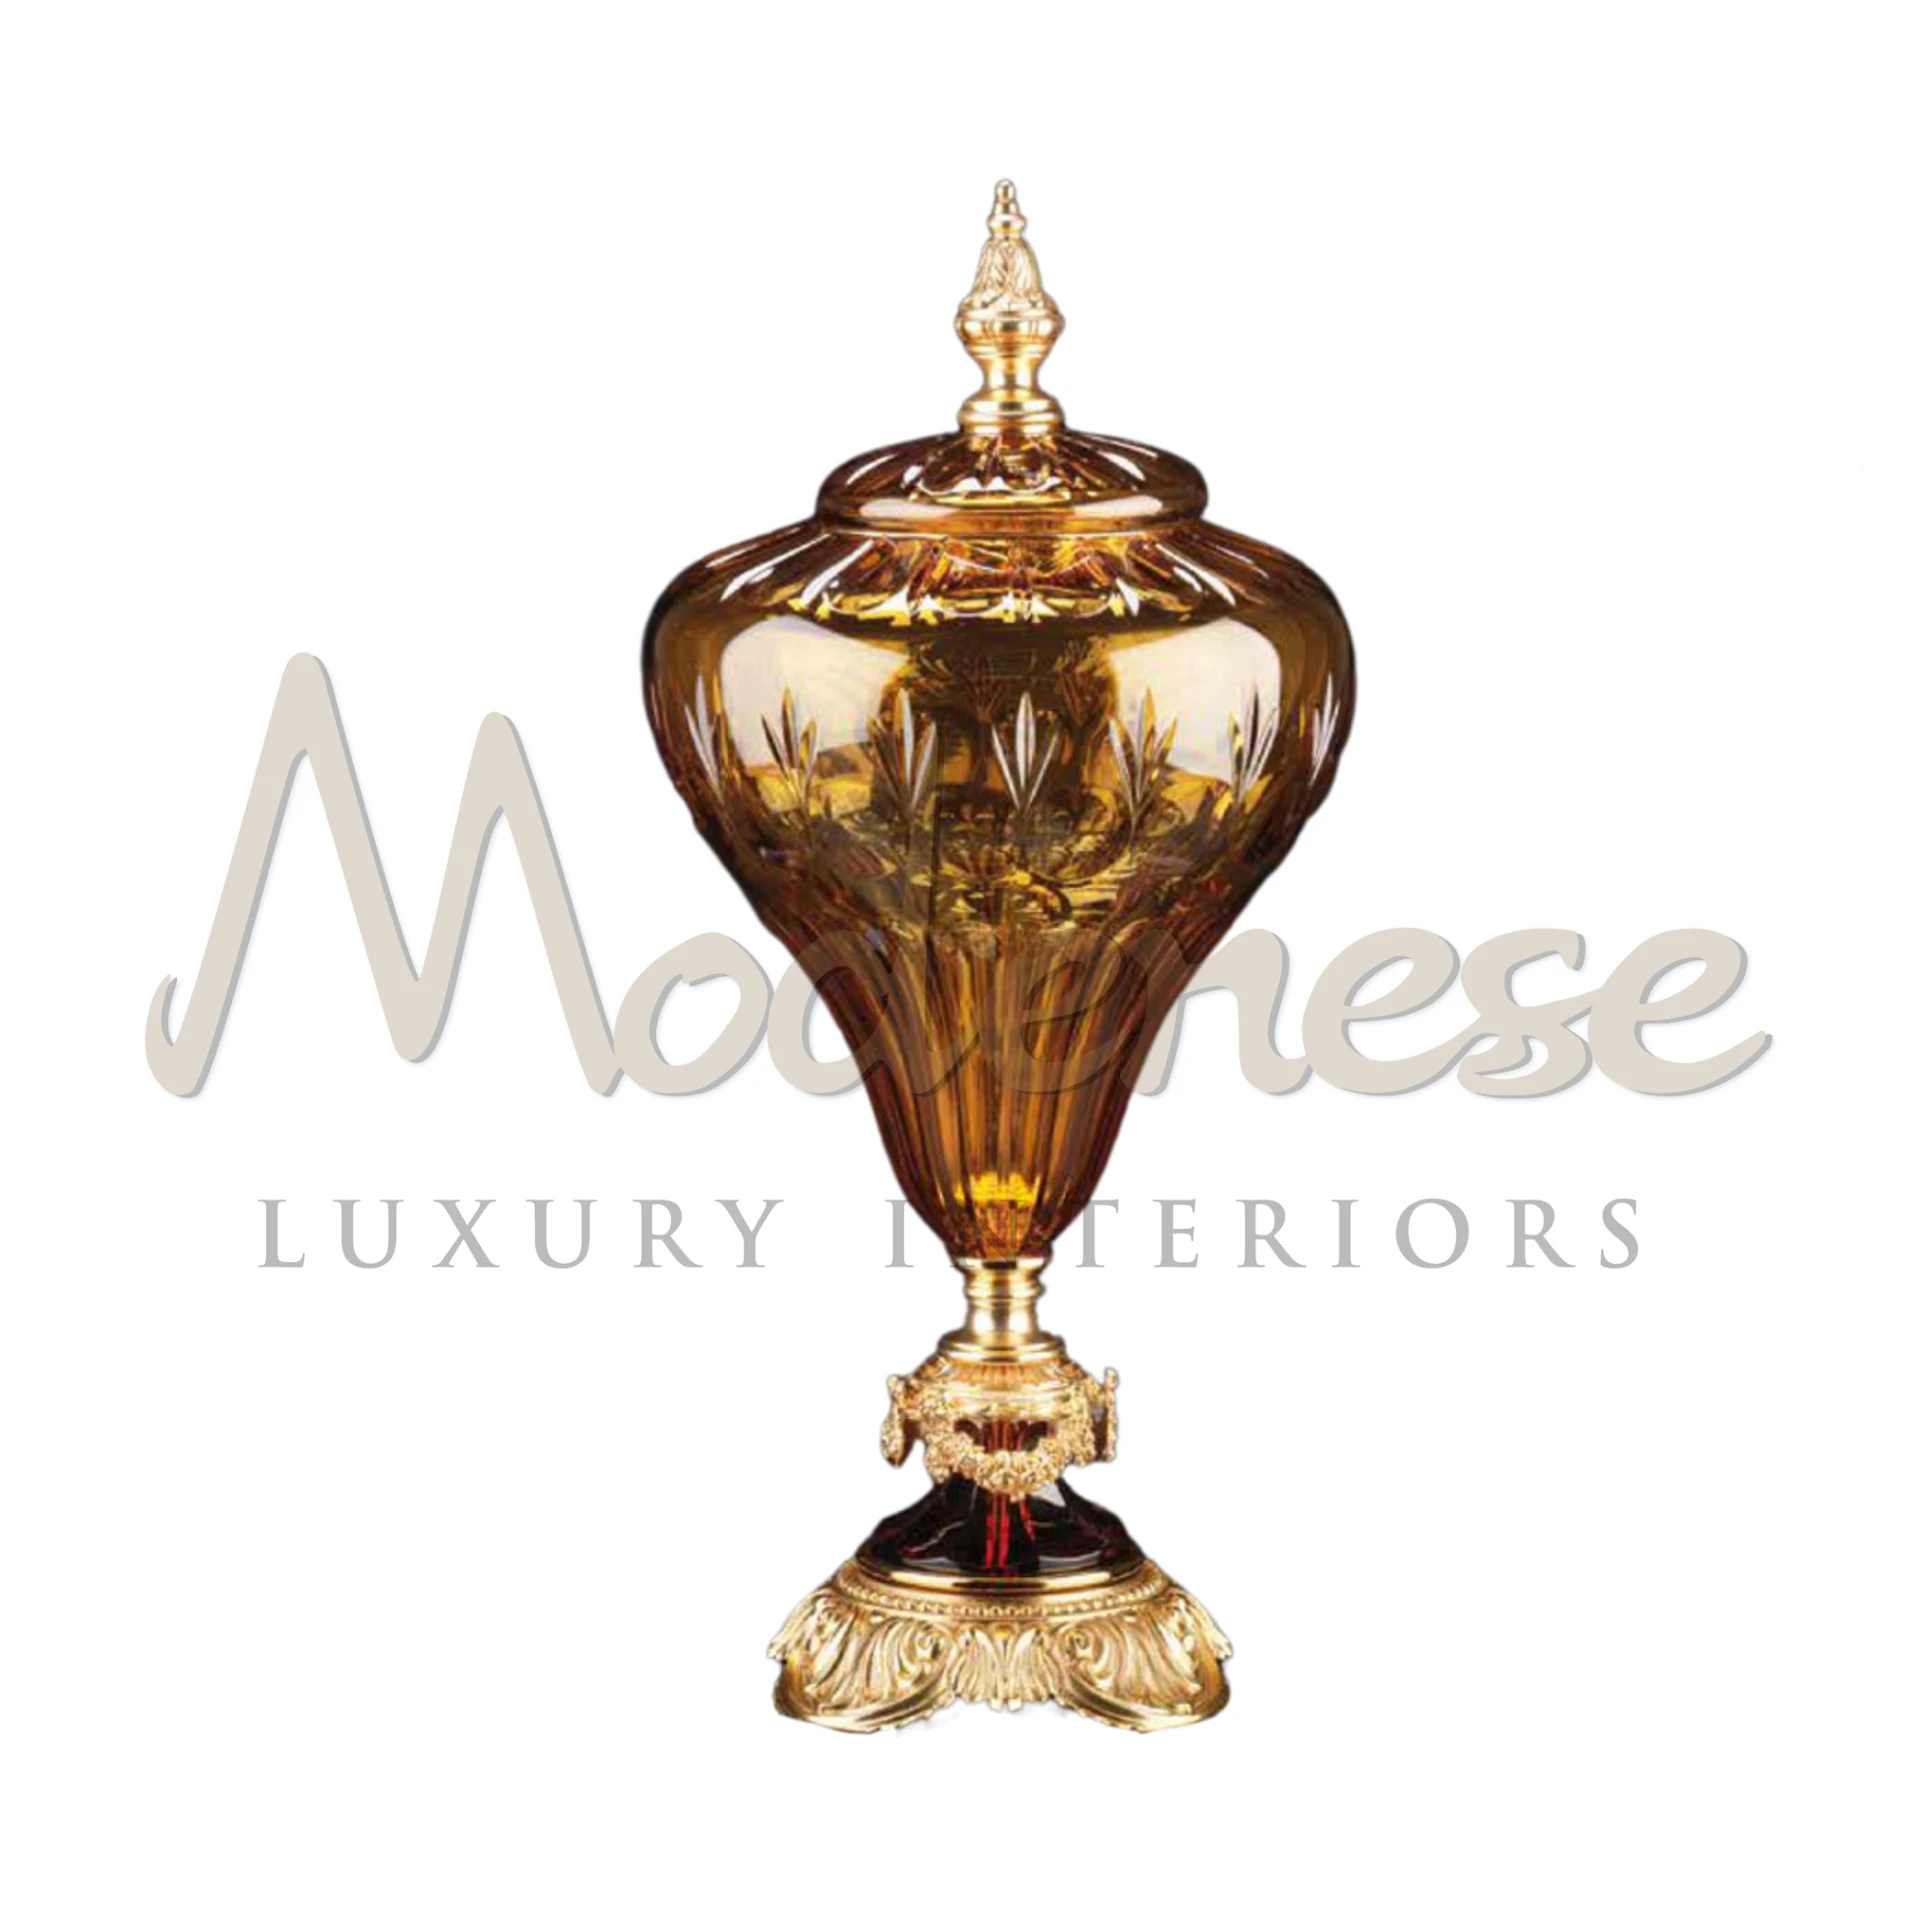 Modenese Designer Tall Glass Vase, epitome of high-end sophistication and unique design, perfect for luxury and classic interior settings.






